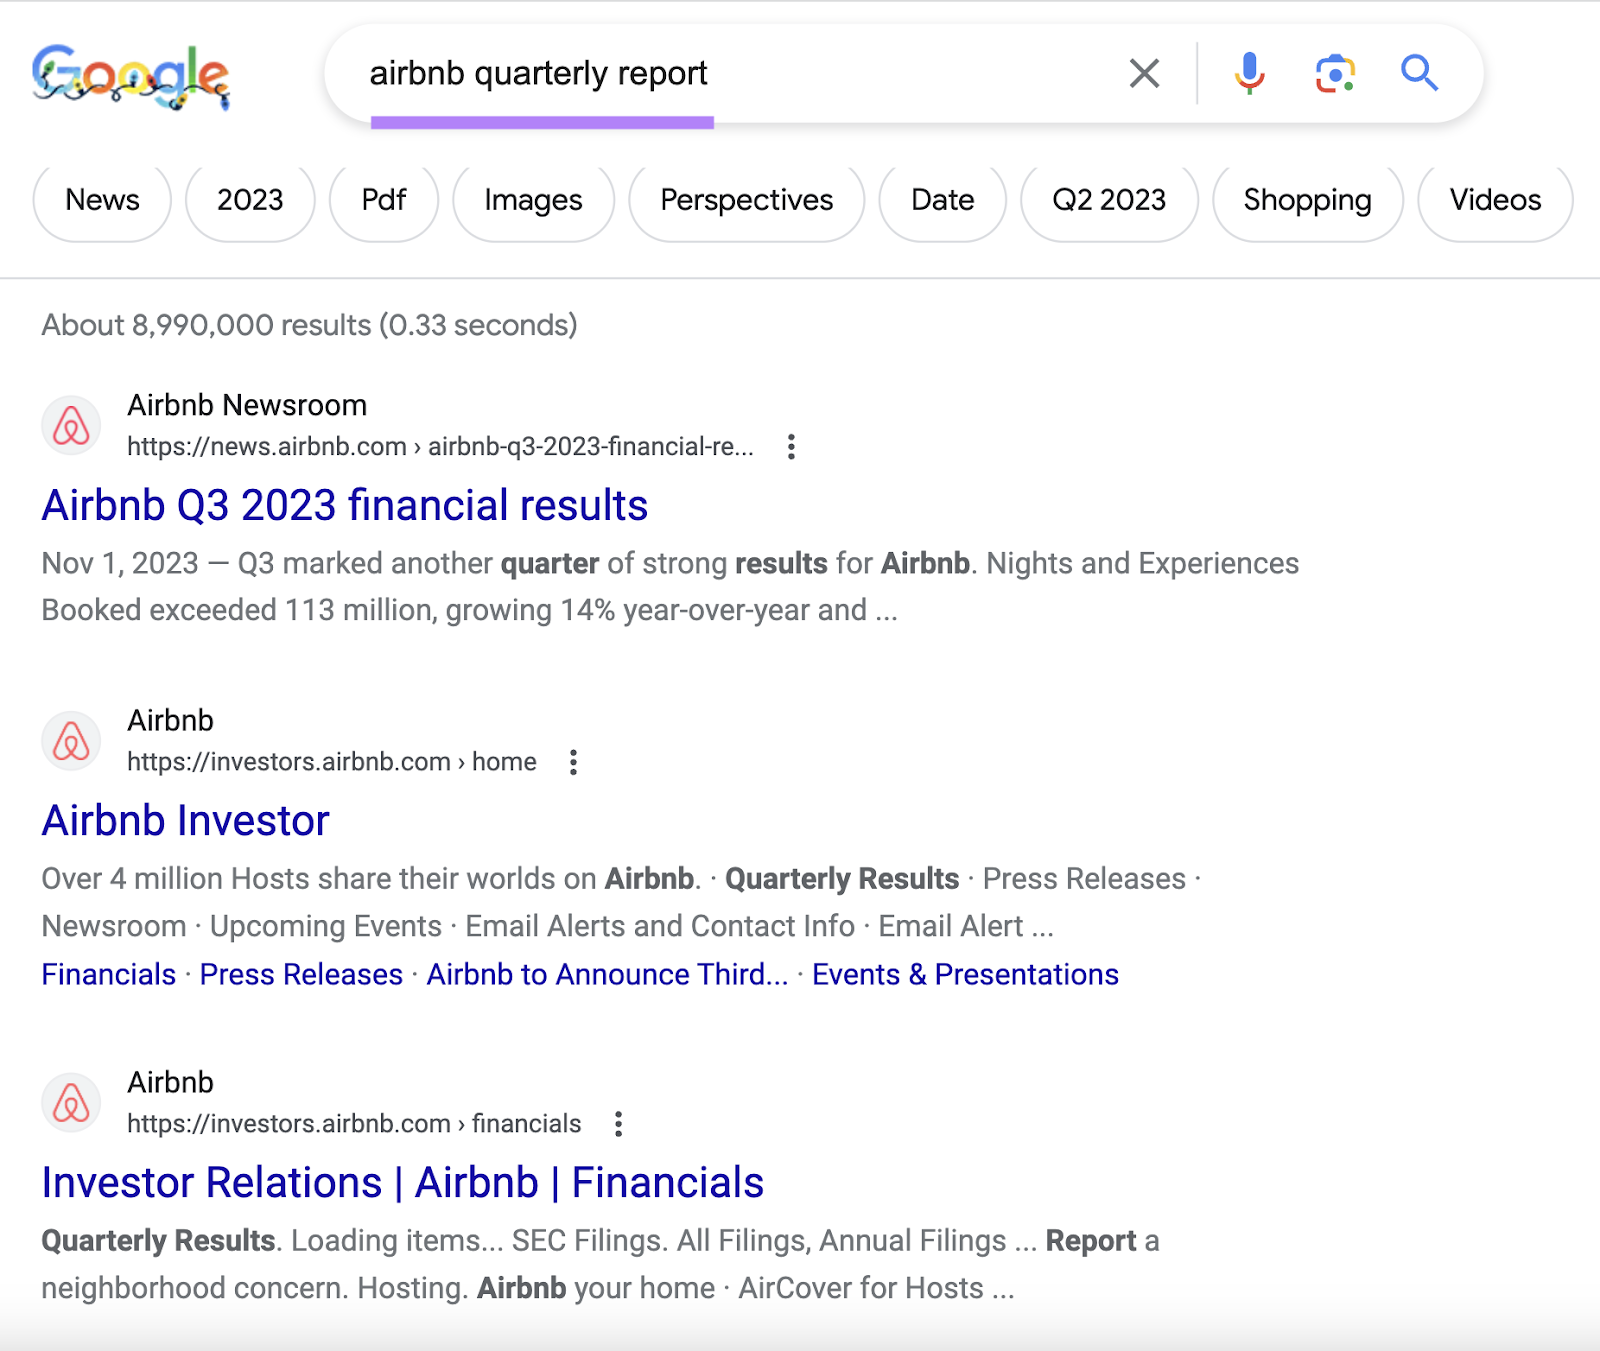 Google's SERP for "airbnb quarterly report” query